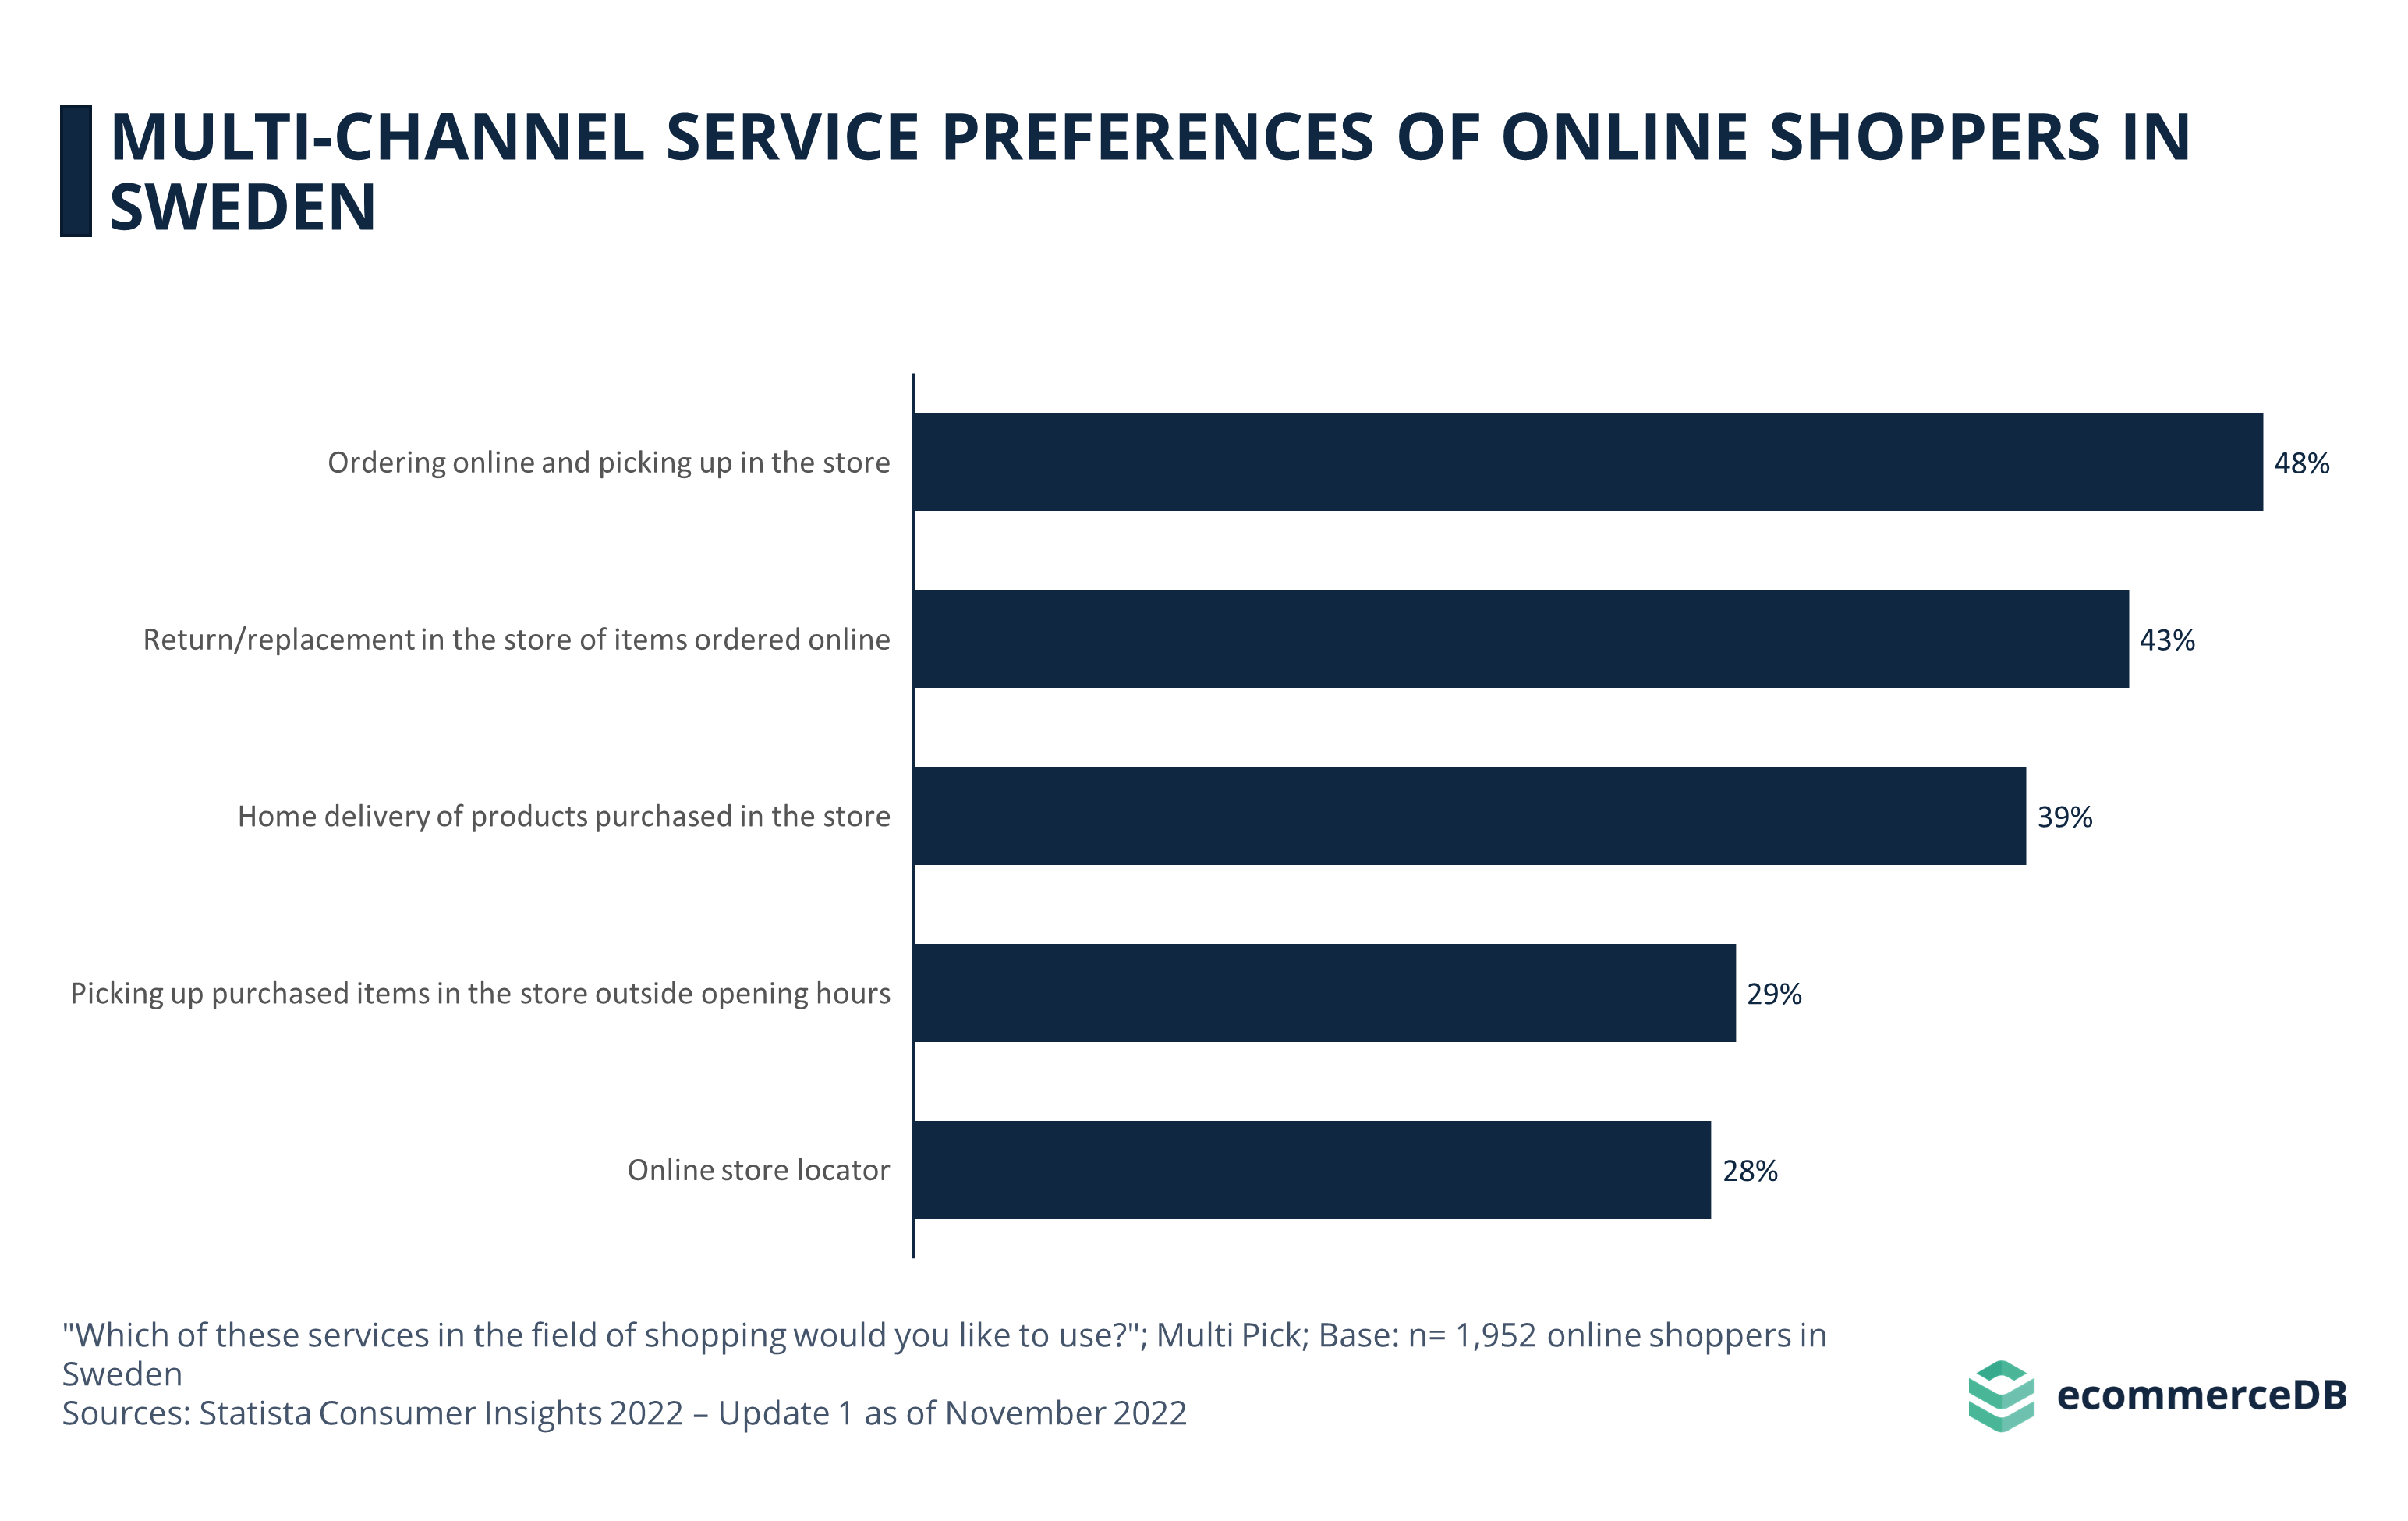 Multi-Channel Service Preferences of Online Shoppers in Sweden